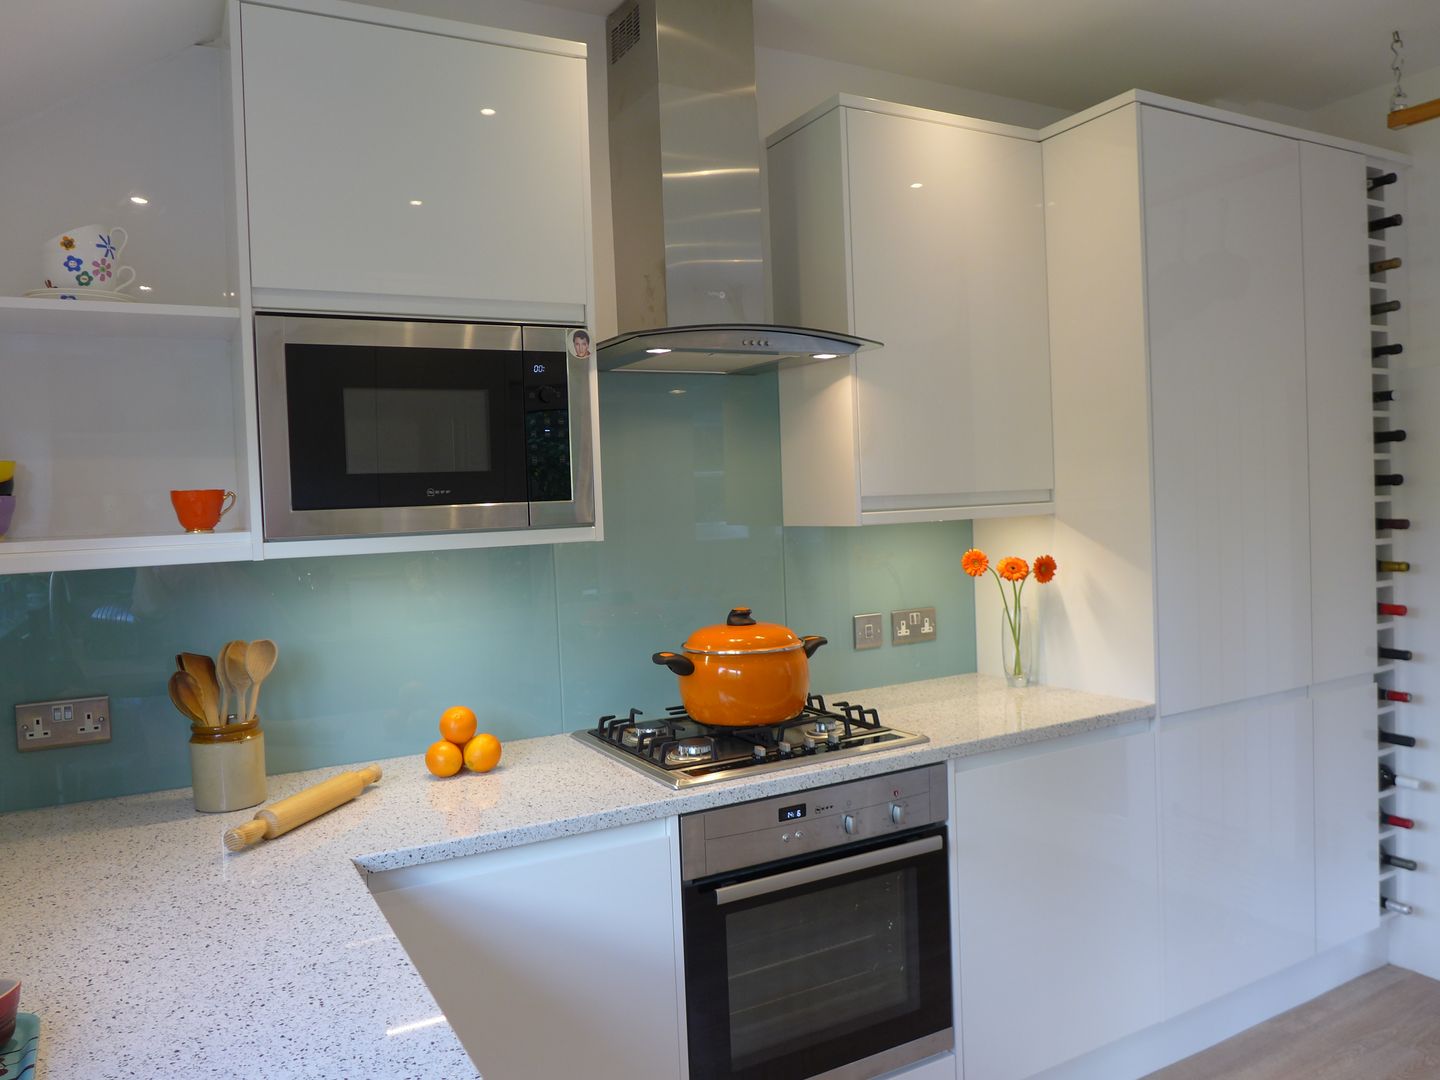 Modern white gloss kitchen Style Within Nowoczesna kuchnia white kitchen,gloss kitchen,modern kitchen,flat kitchen cabinet,integrated microwave,integrated handle,kitchen lighting,glass splashback,kitchen splashback,blue splashback,quartz worktop,white worktop